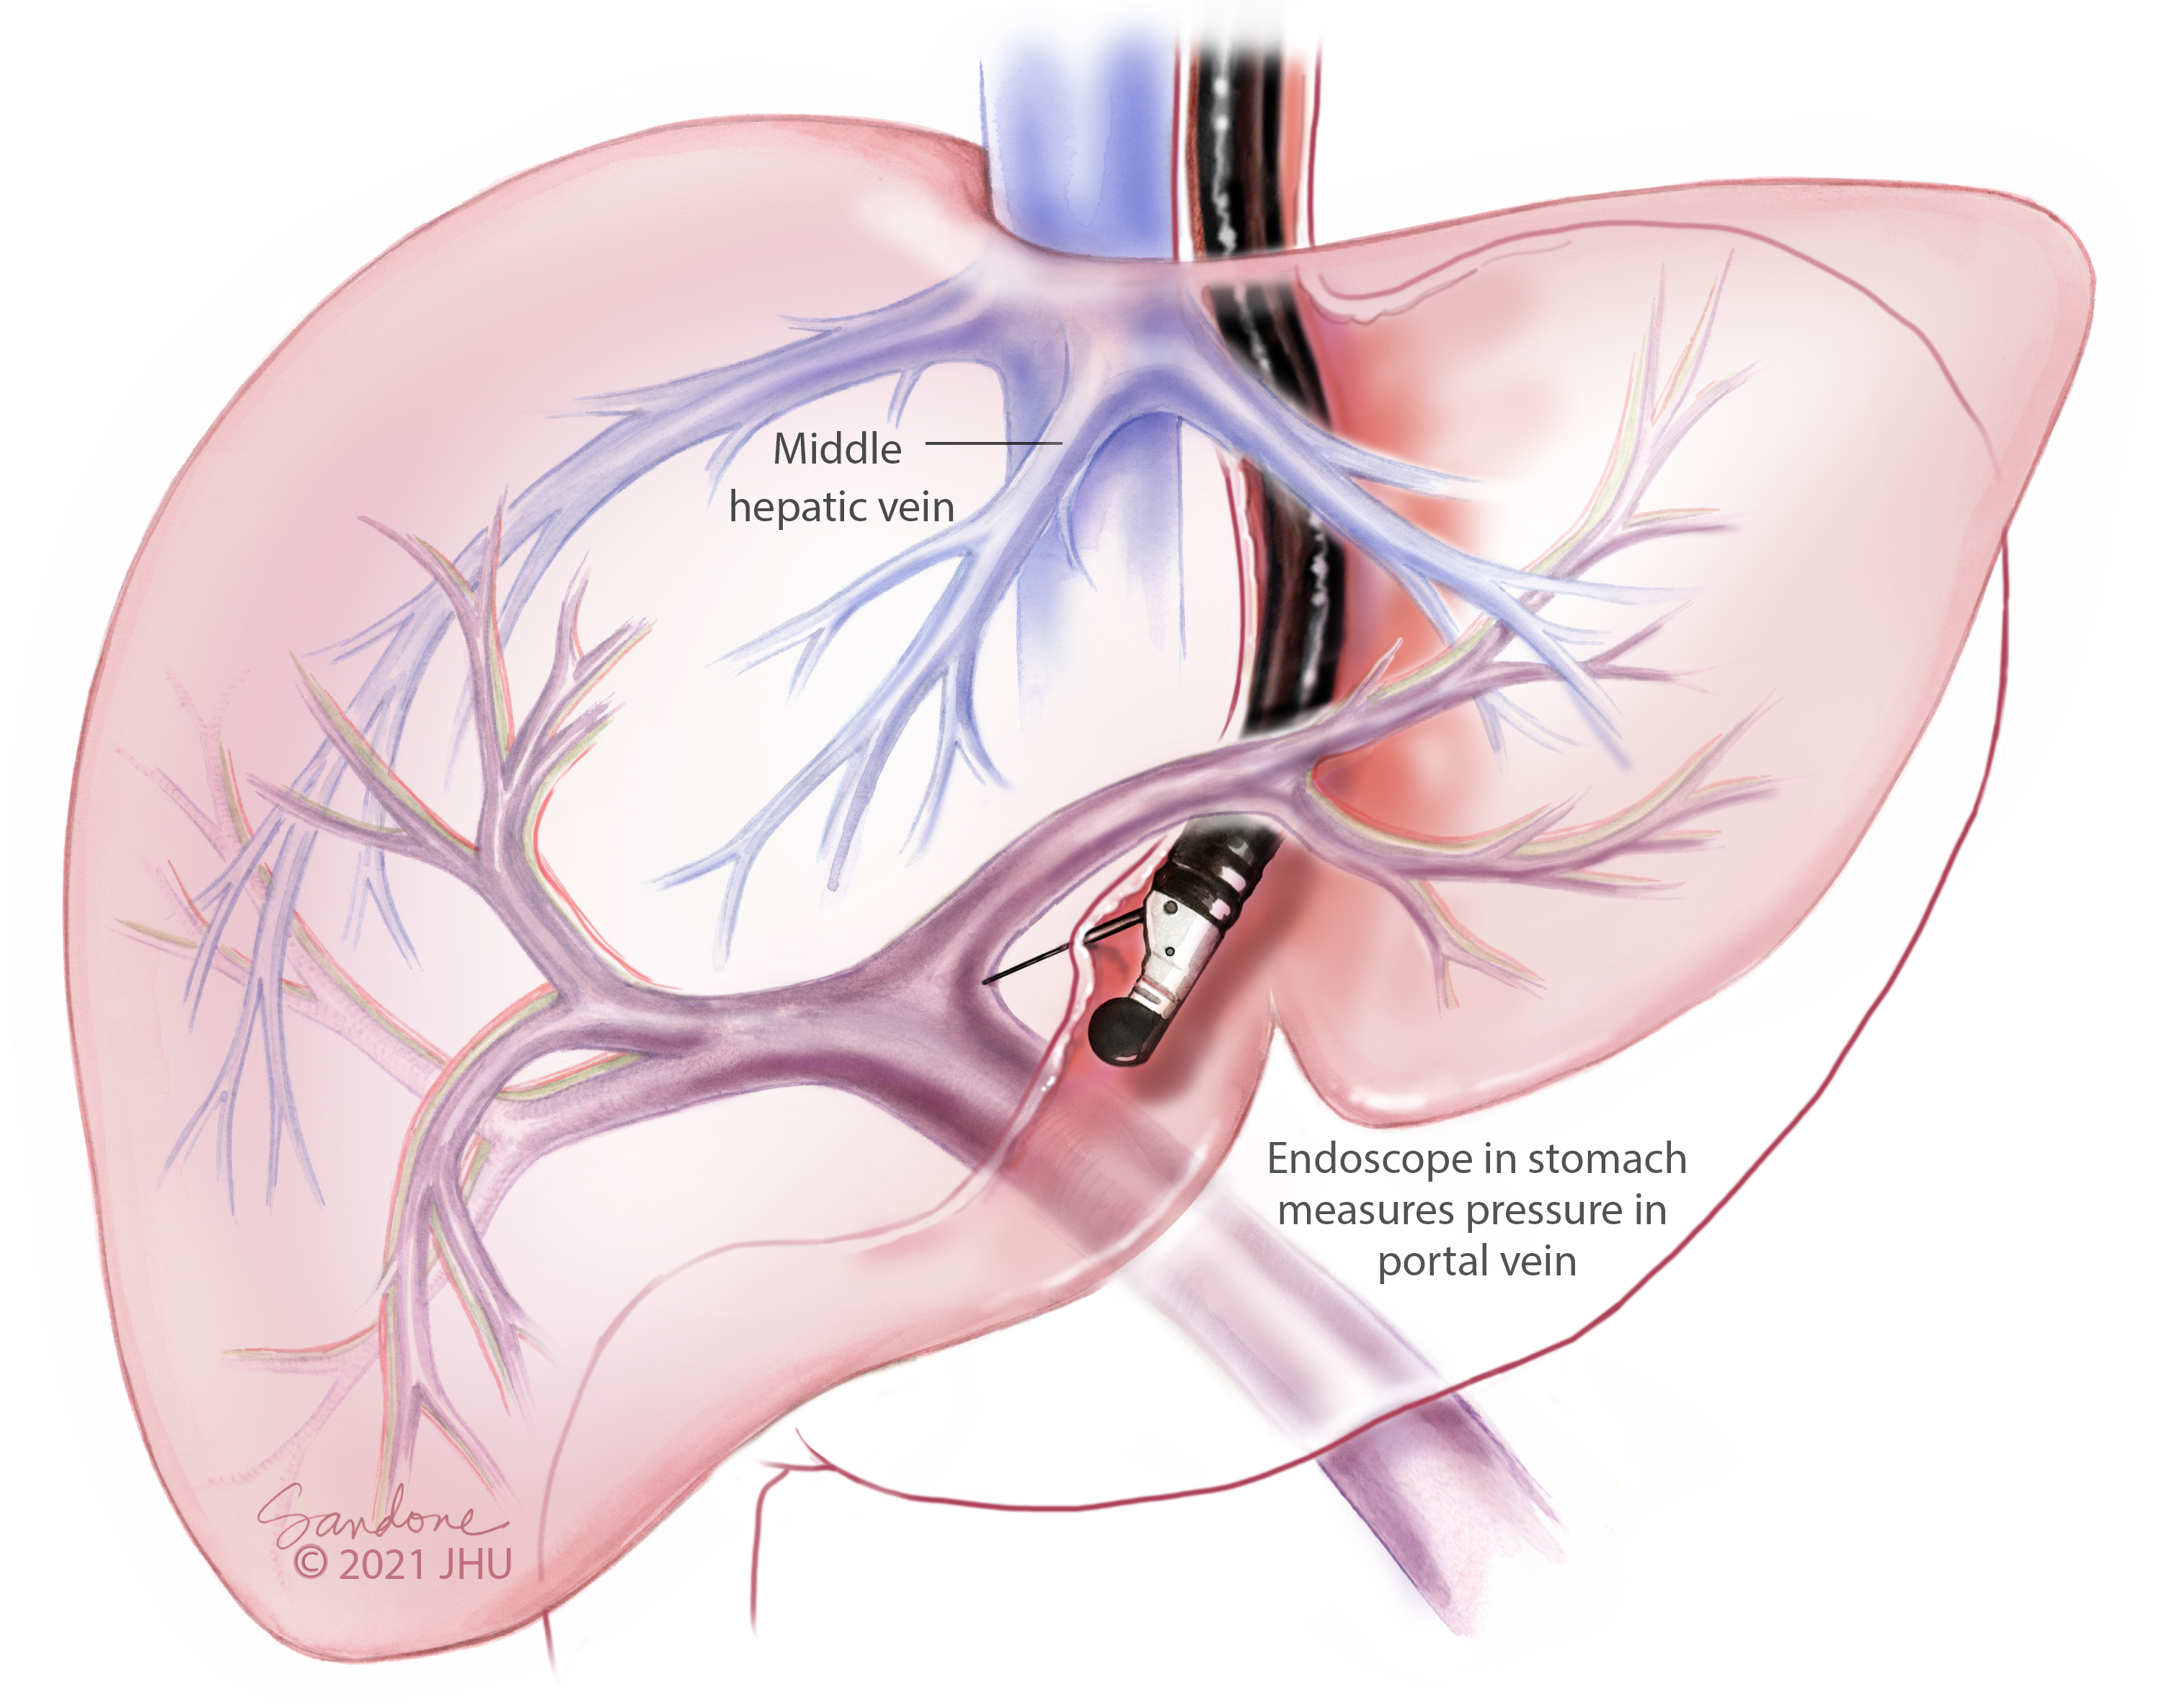 An illustration shows an endoscope in the stomach that measures portal vein pressure.